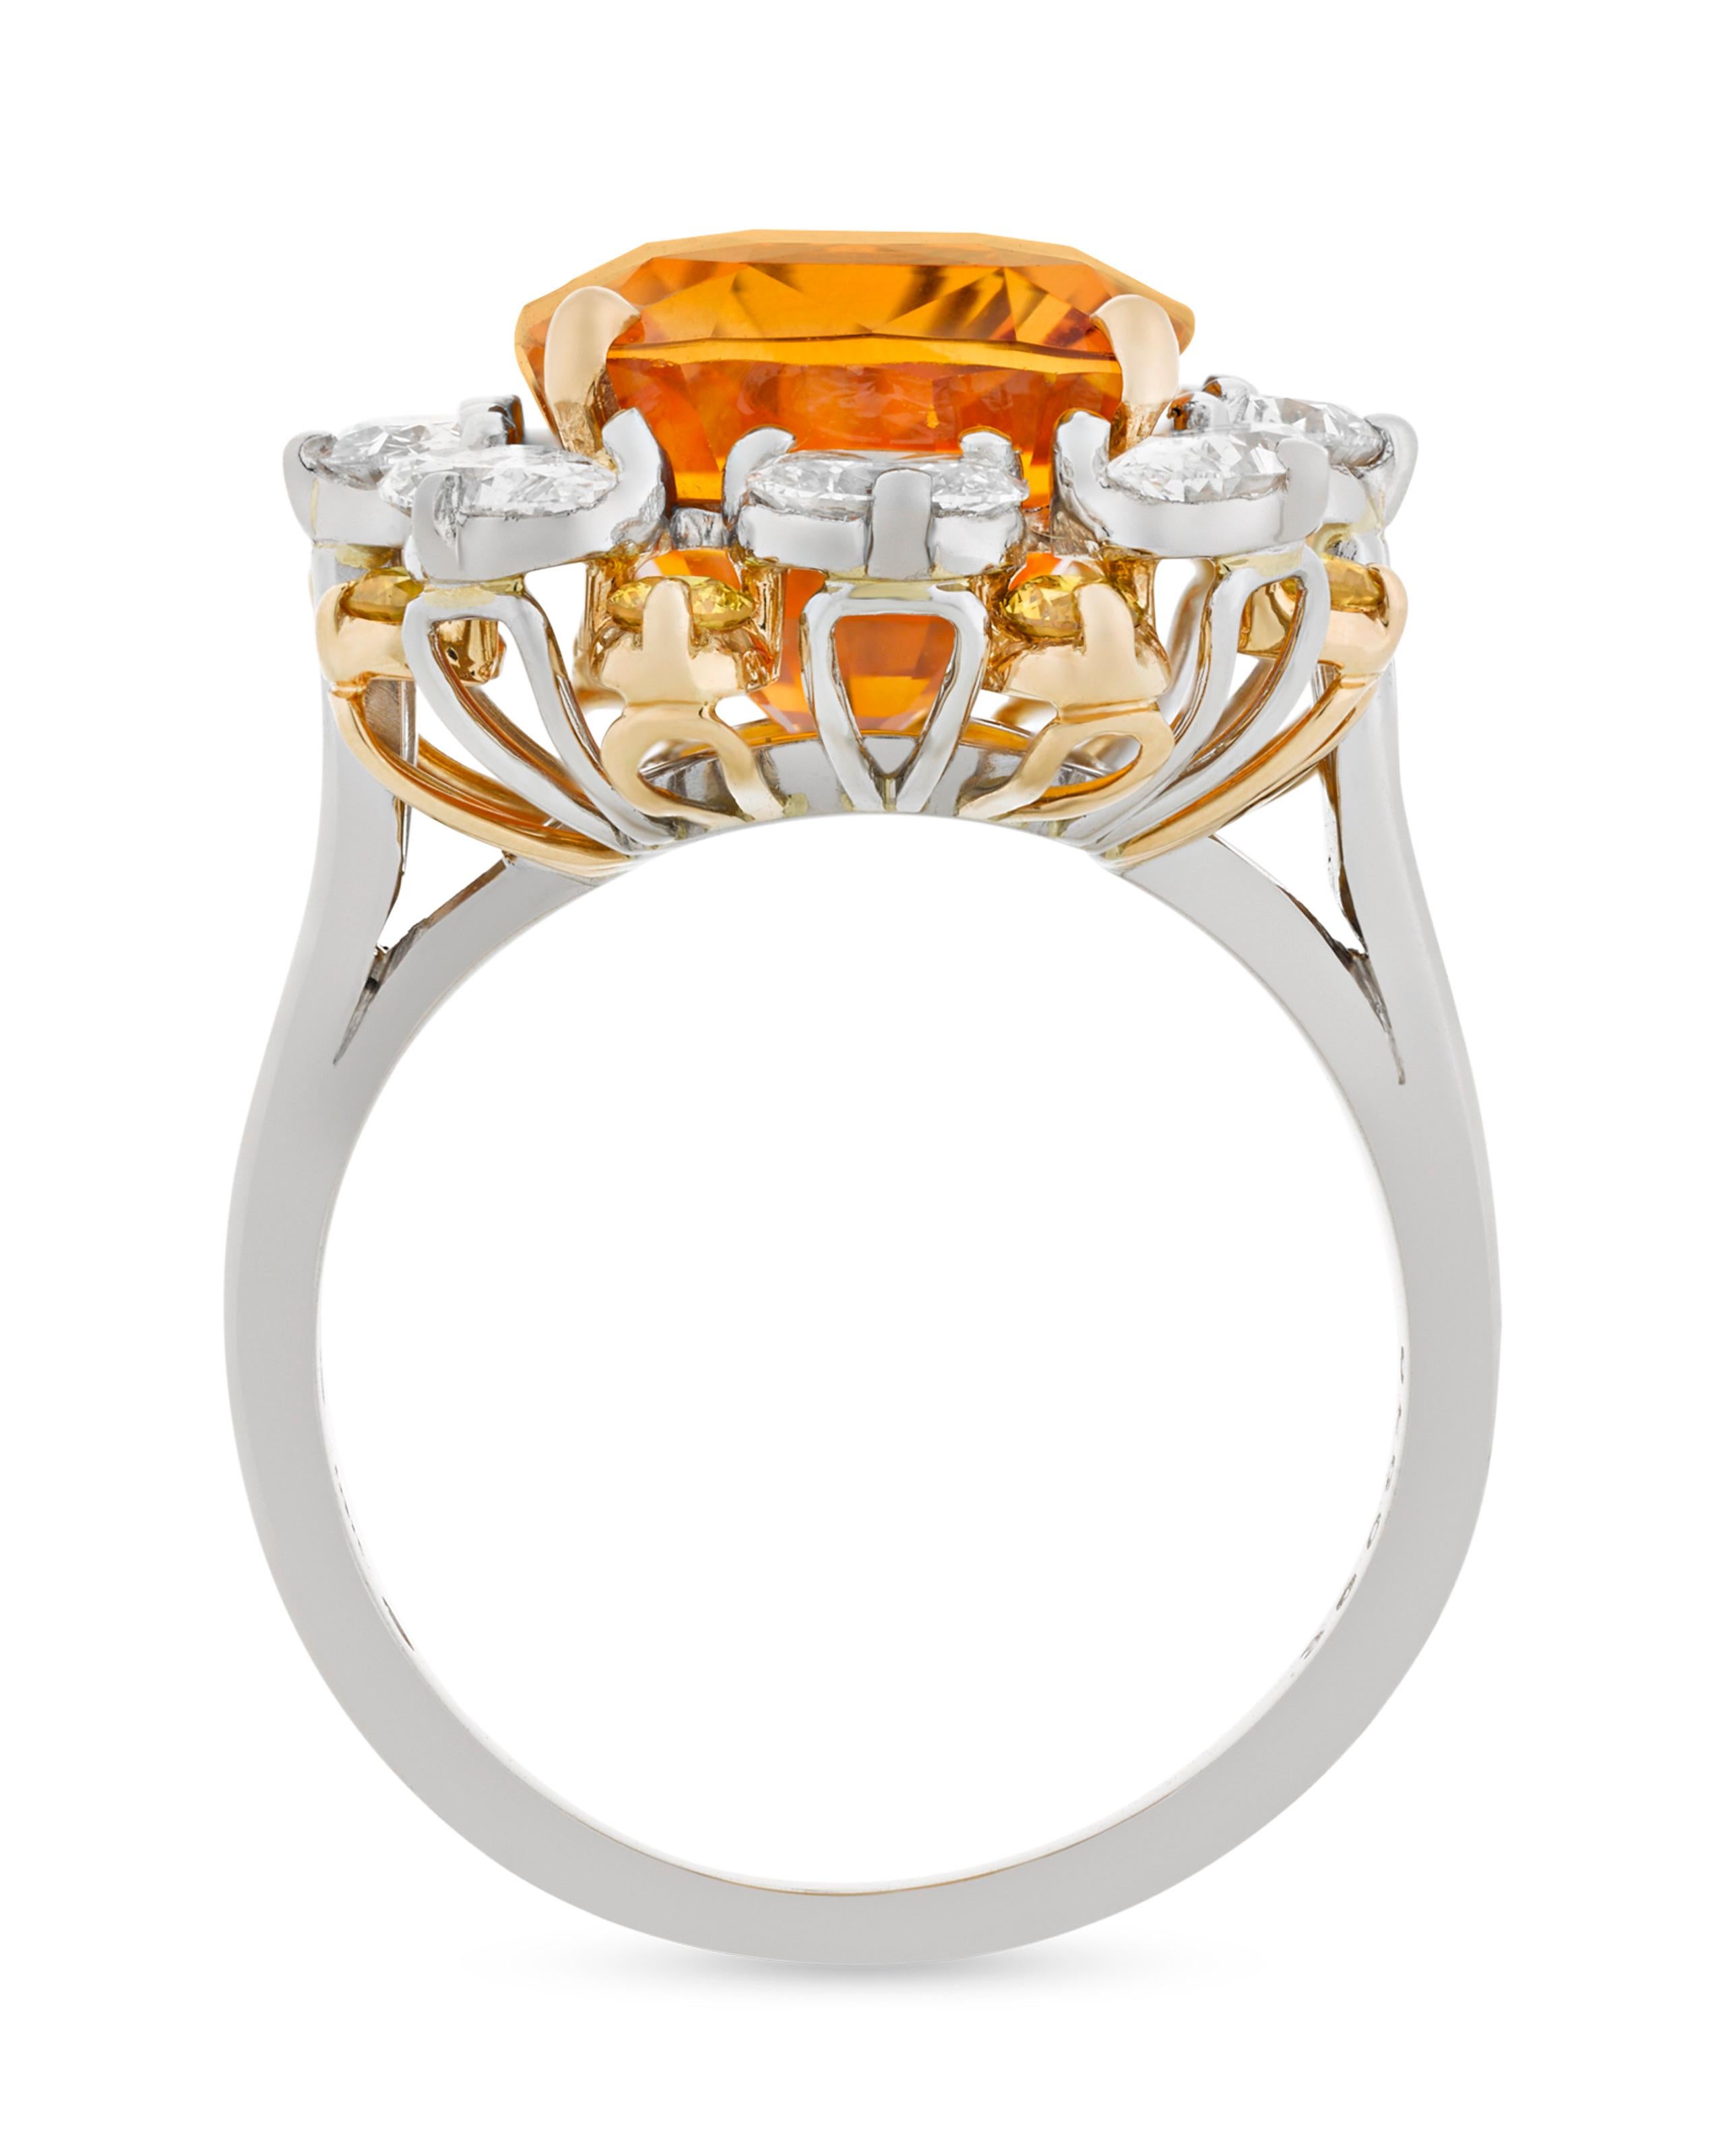 A dazzling 4.90-carat orange sapphire glows vibrantly in this eye-catching ring by the renowned Oscar Heyman. While sapphires are most commonly found in shades of blue or yellow, this jewel's rich orange is reminiscent of a mandarin garnet or fire